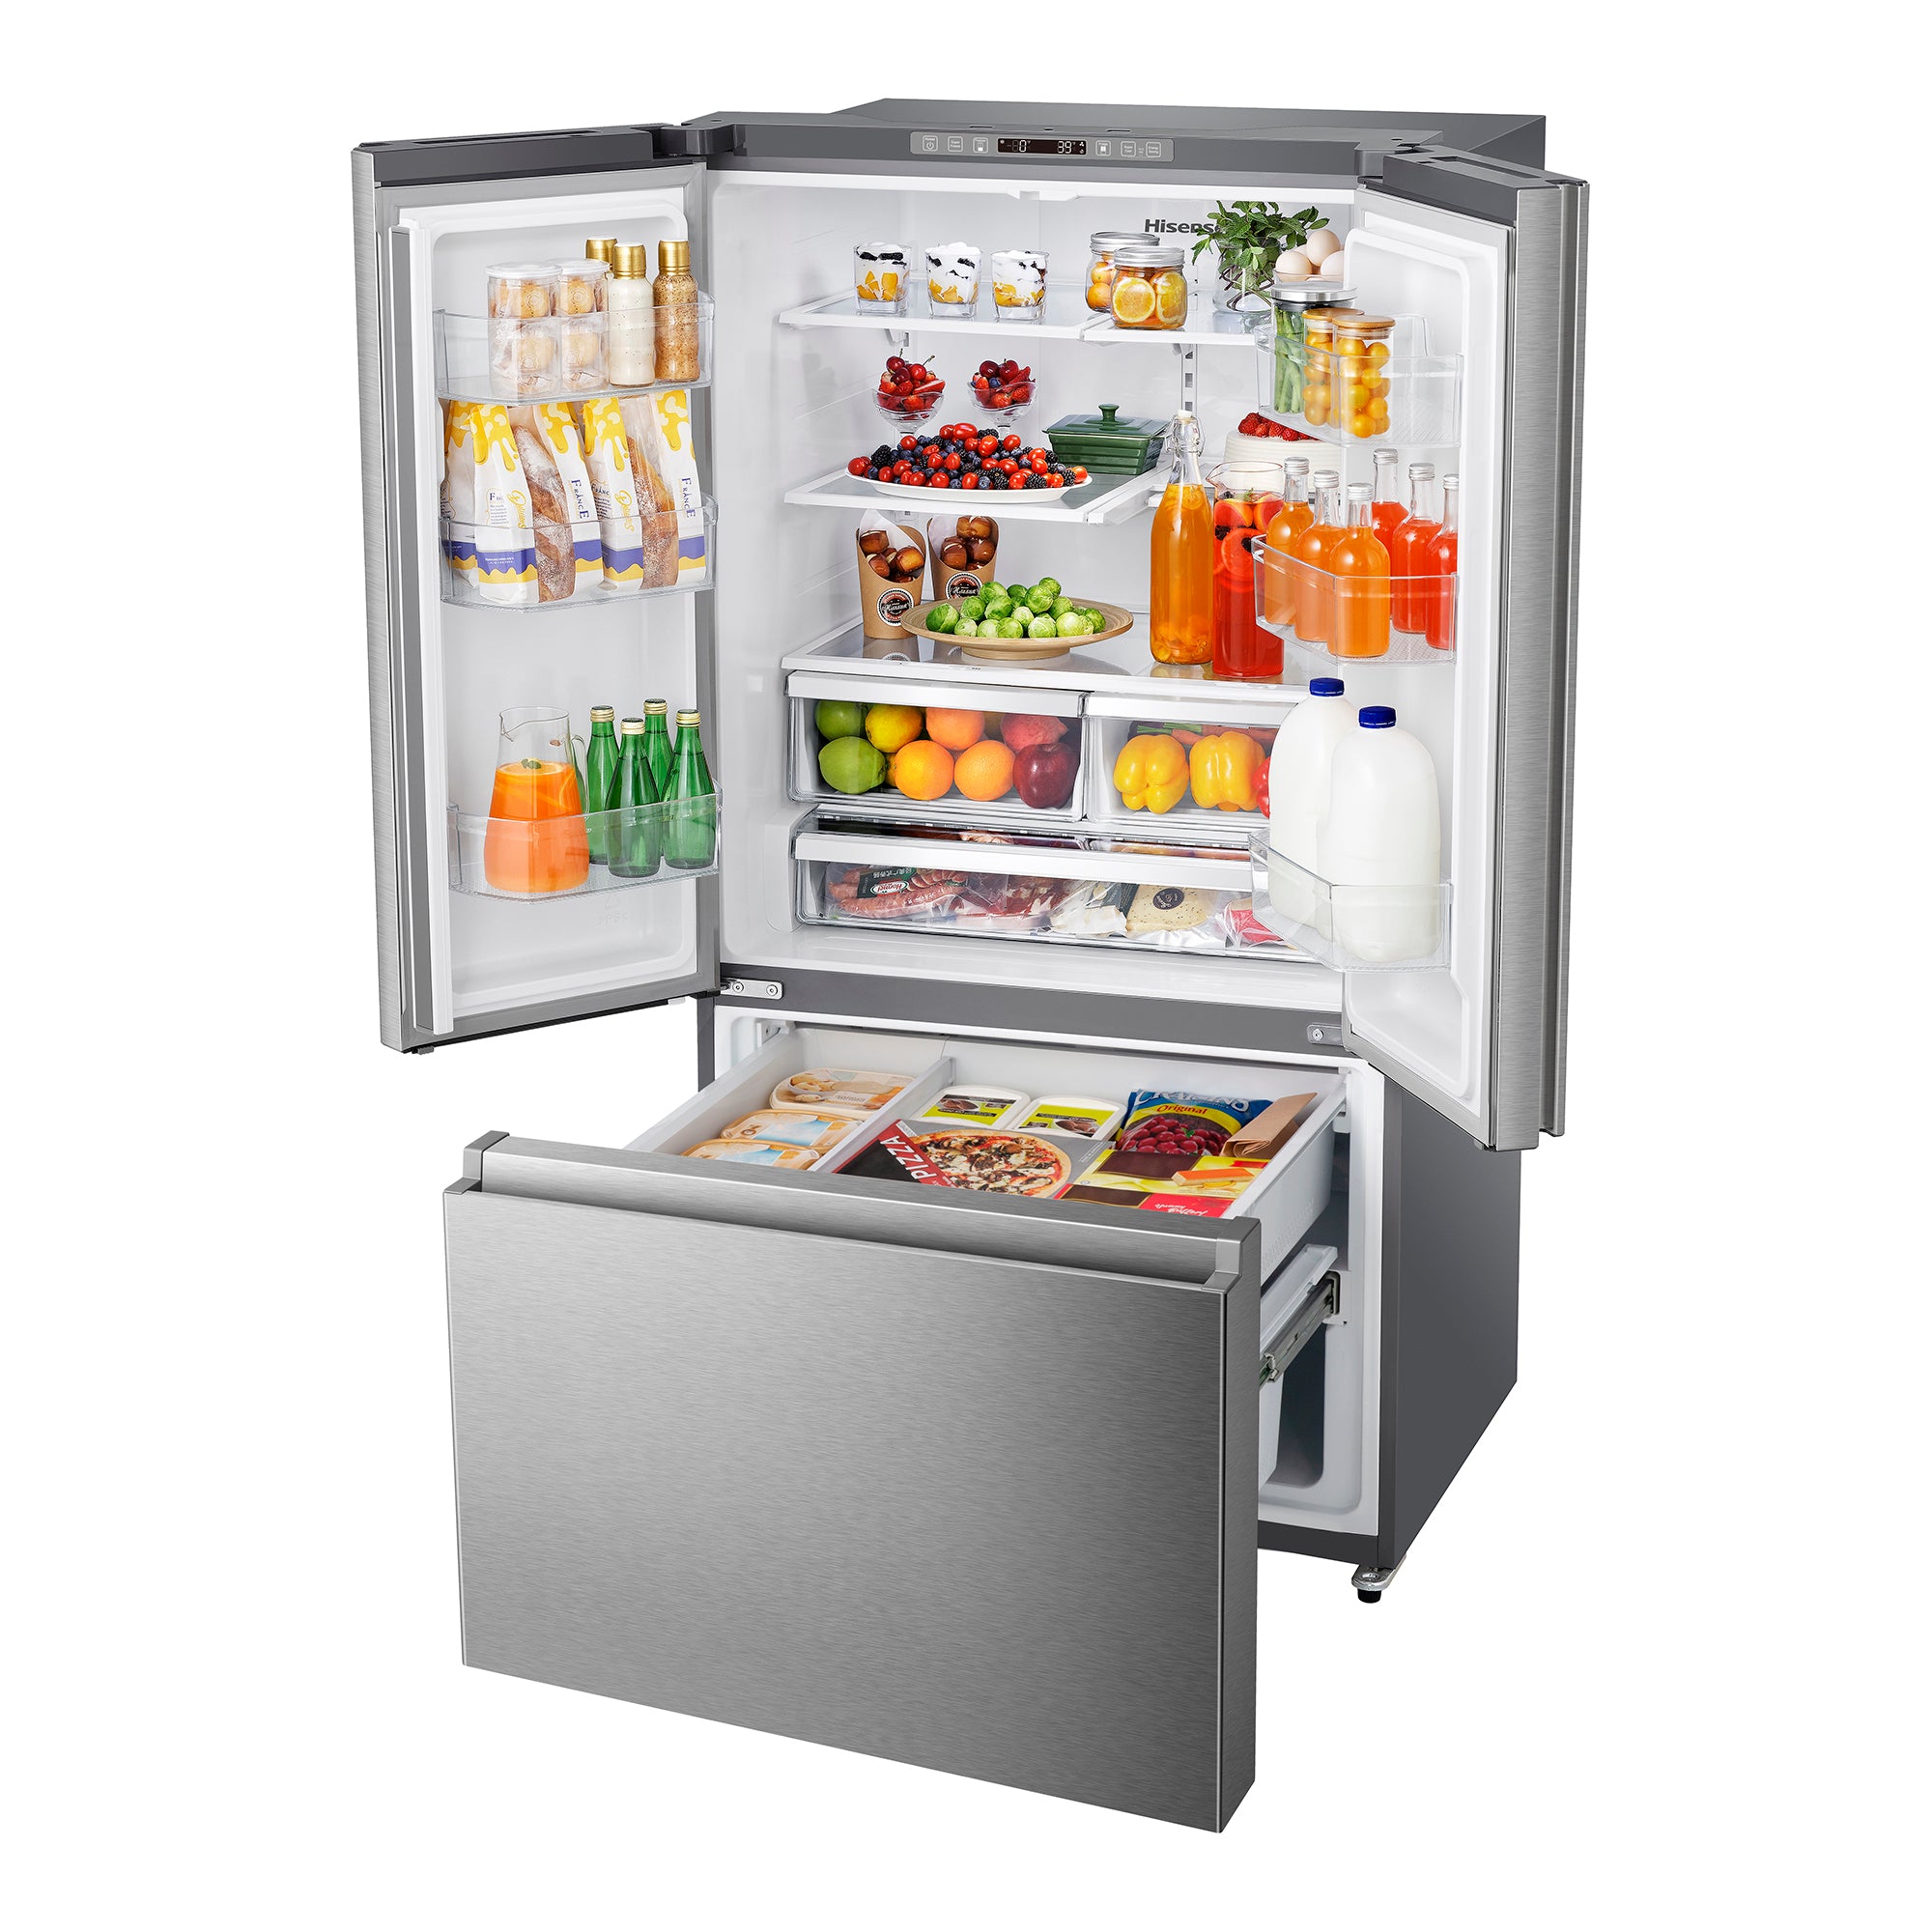 Hisense - 35.98 Inch 26.6 cu. ft French Door Refrigerator in Stainless - RF27A3FSE